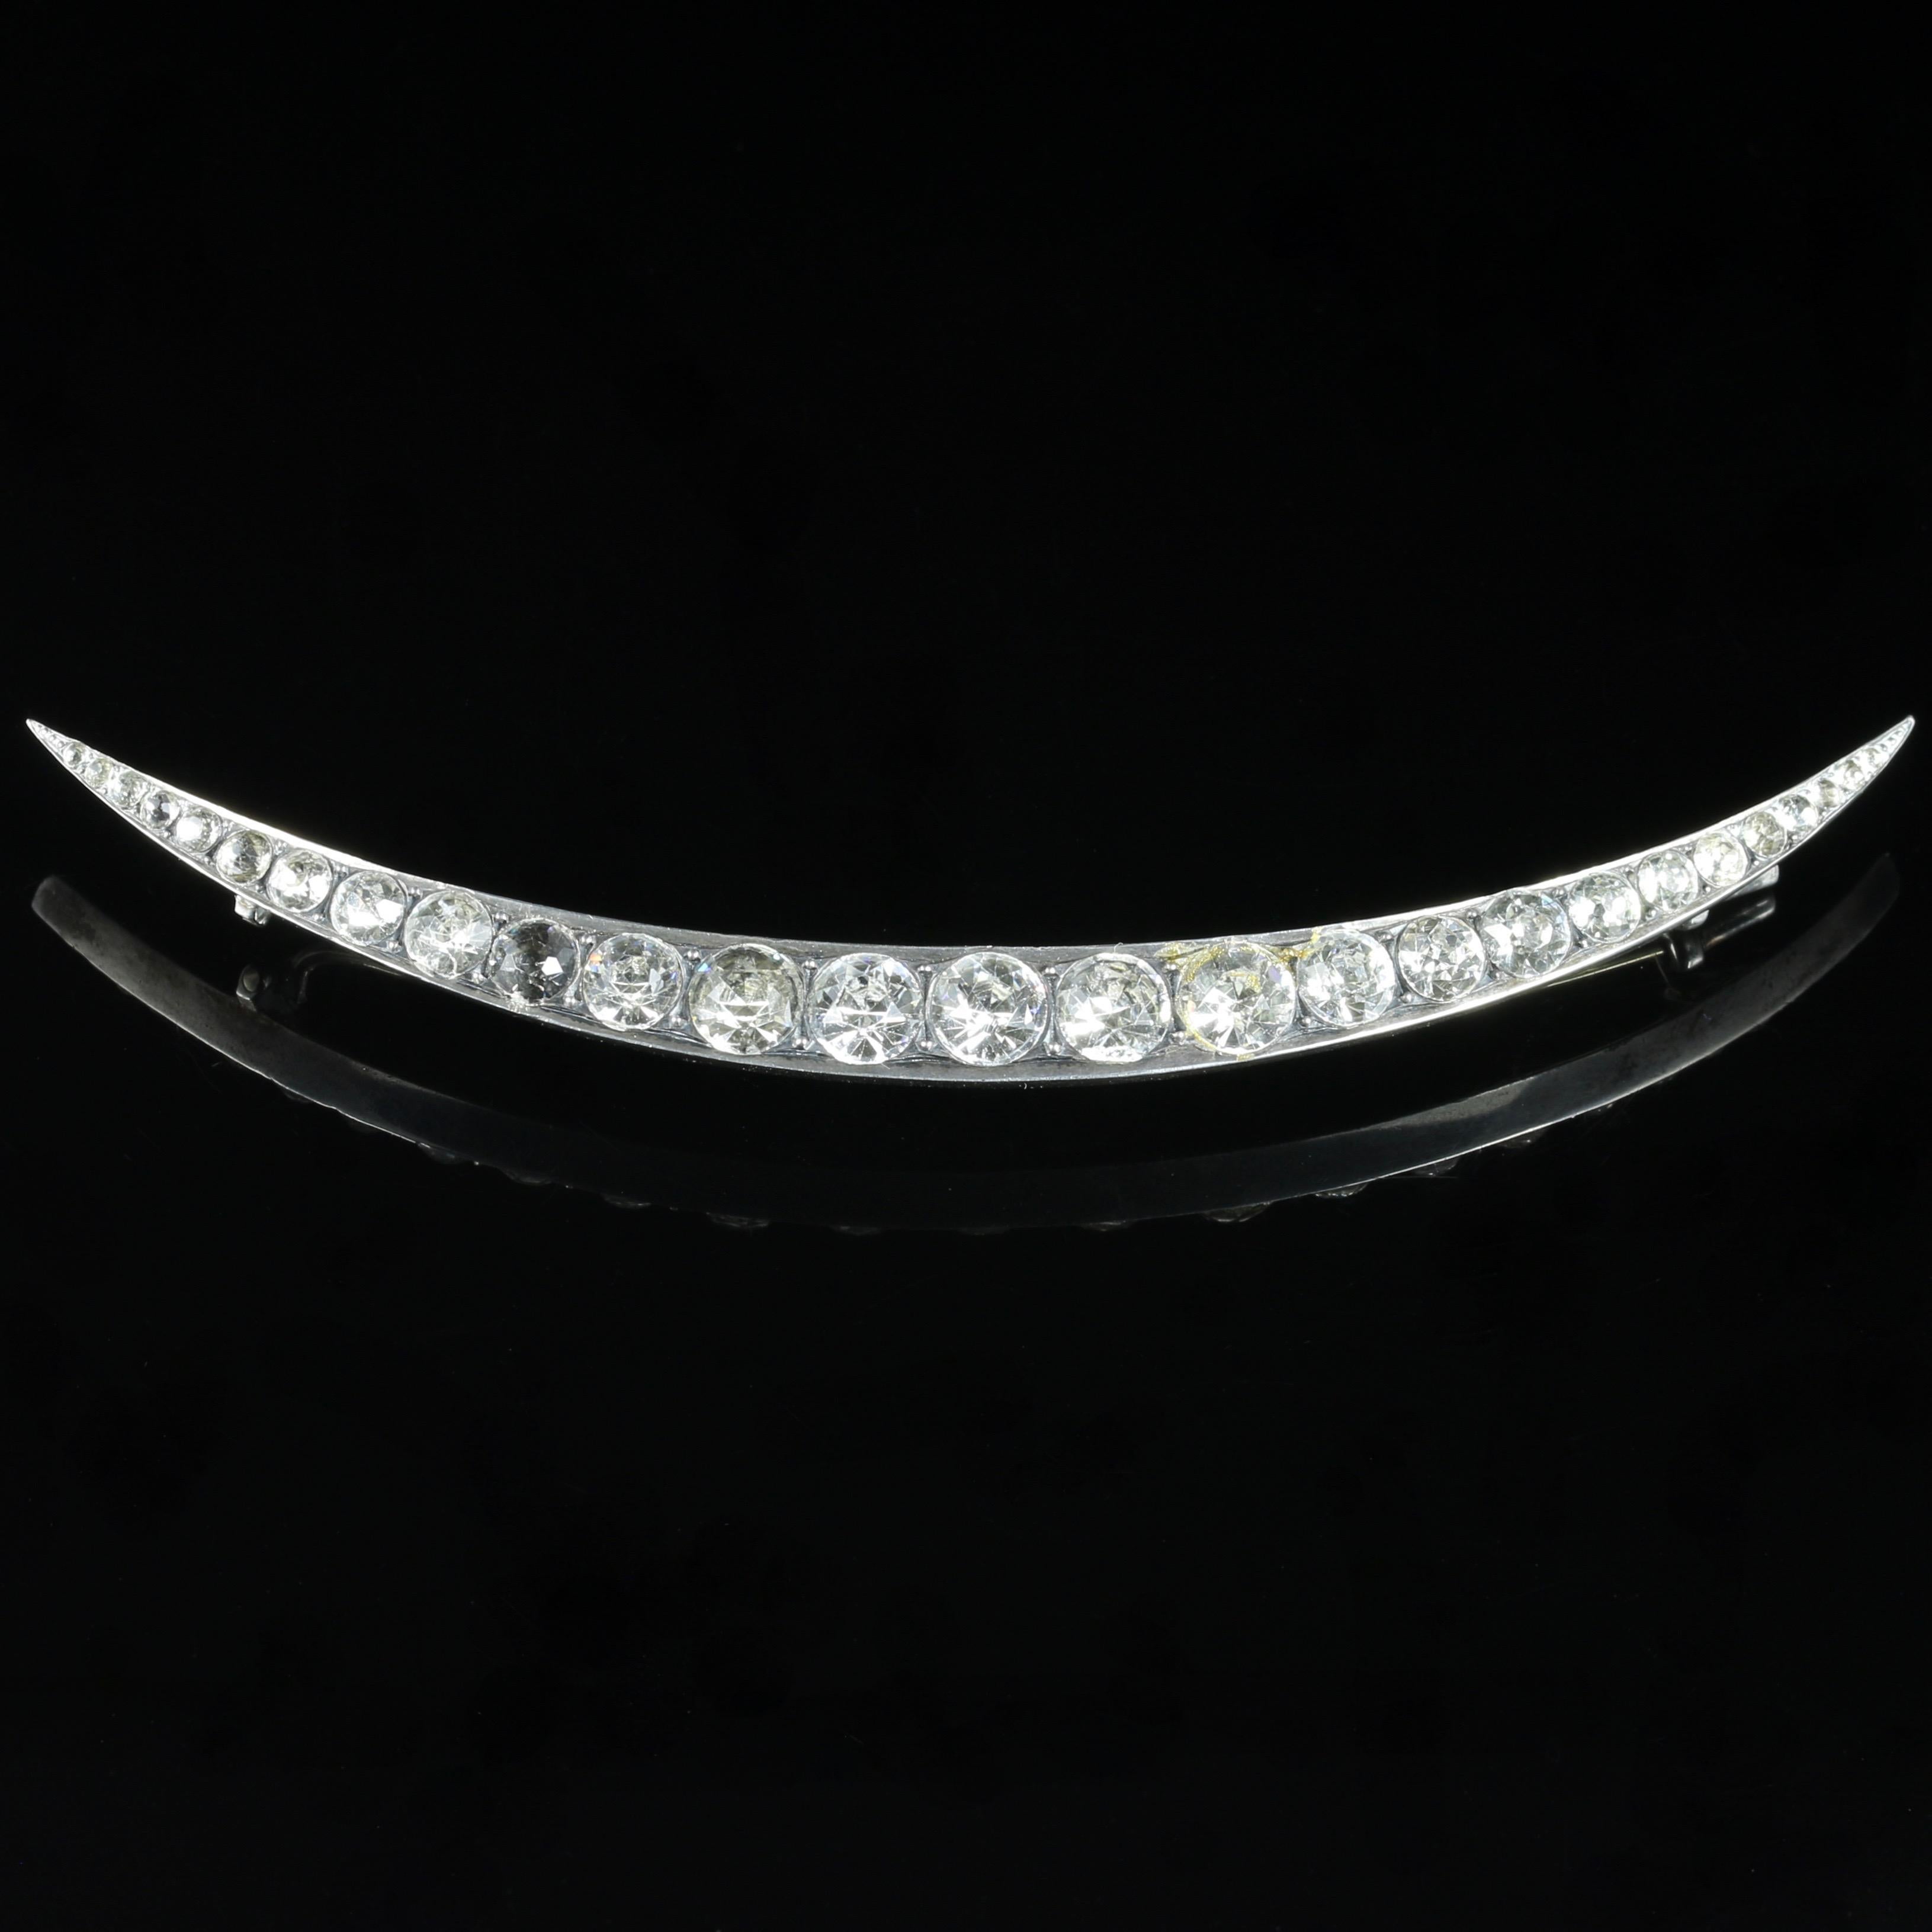 For more details please click continue reading down below...

This exquisite antique Victorian crescent brooch is adorned with old cut Paste Stones. Circa 1860

All set in Sterling Sliver.

27 fabulous old cut Paste Stones are set into this amazing